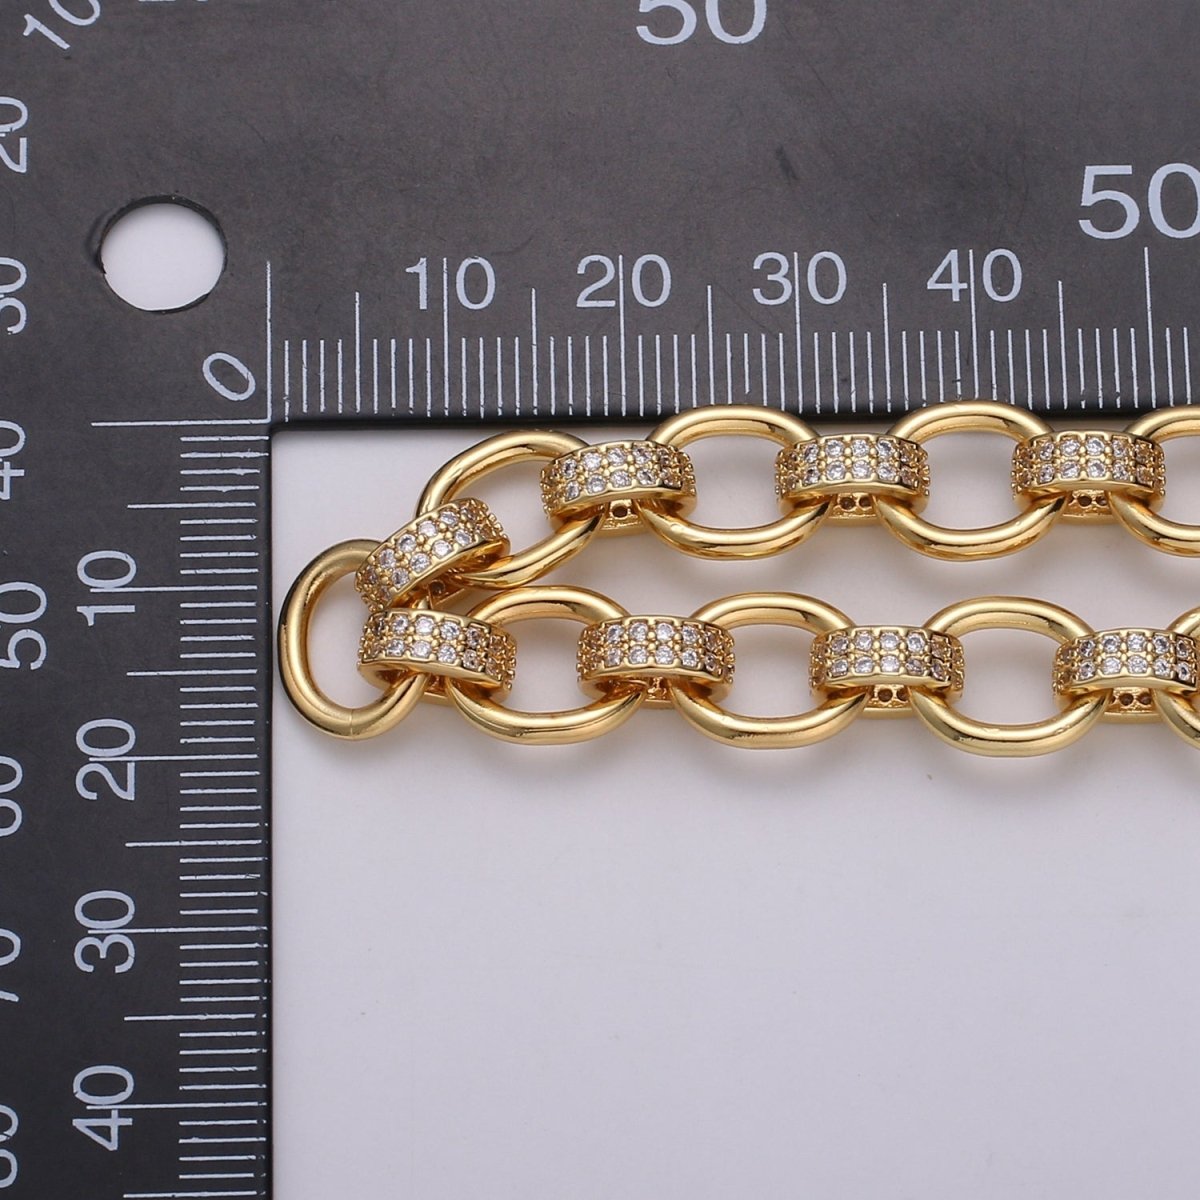 24K Gold Filled Fancy Texture ROLO Linked Chain by Yard, Wholesale Roll Chain | ROLL-373 (O-060) Clearance Pricing - DLUXCA